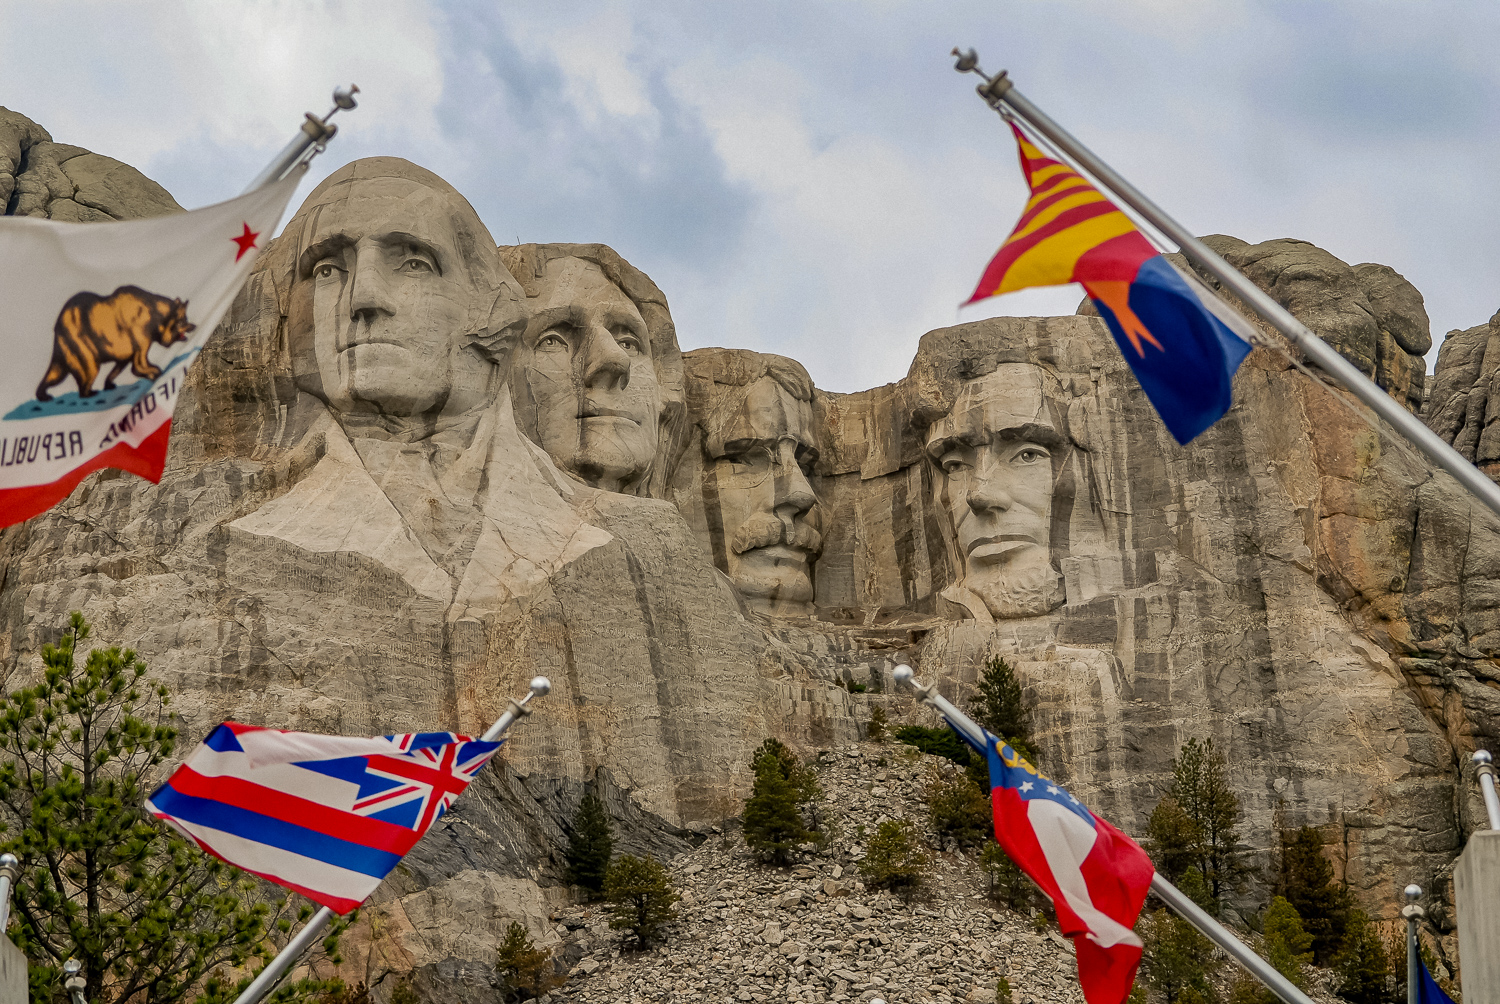 Mt Rushmore with Flags